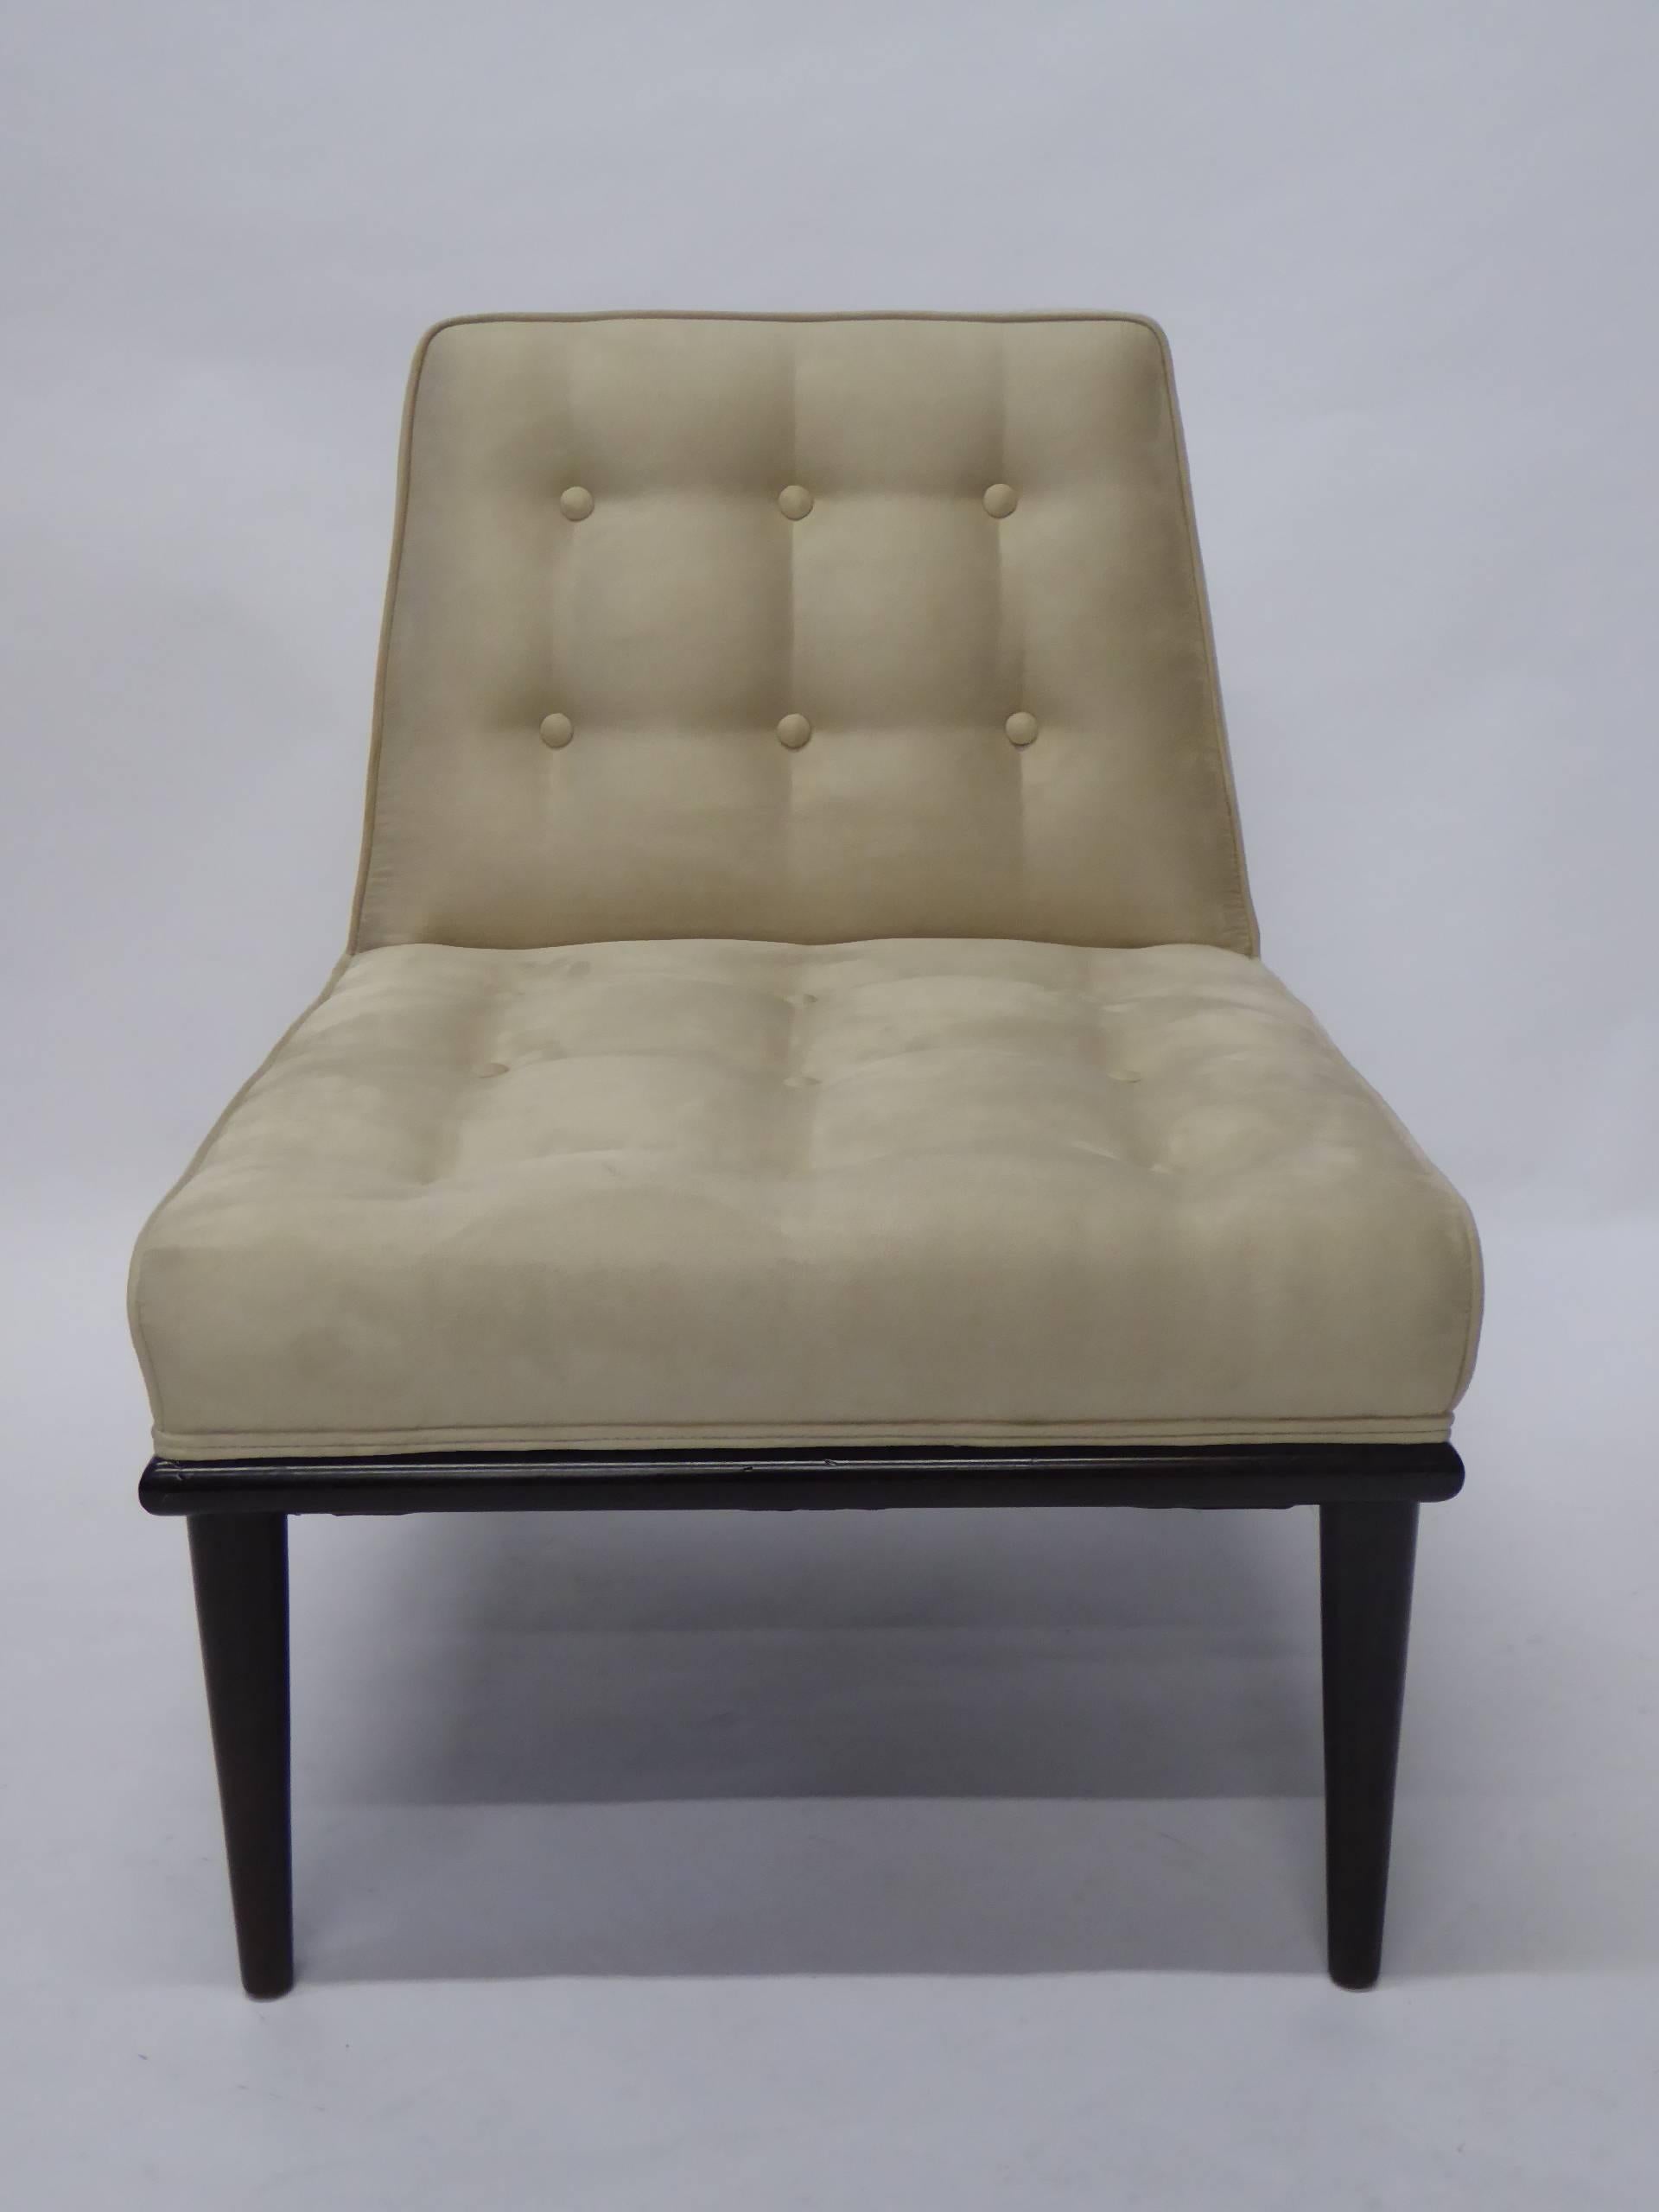 Edward Wormley style lounge or slipper chair with button tufted ultrasuede upholstery. Round molded ebonized wood base with tapering legs. New cream ultrasuede fabric. Quite elegant and urbane.

Measurements:
23 1/2